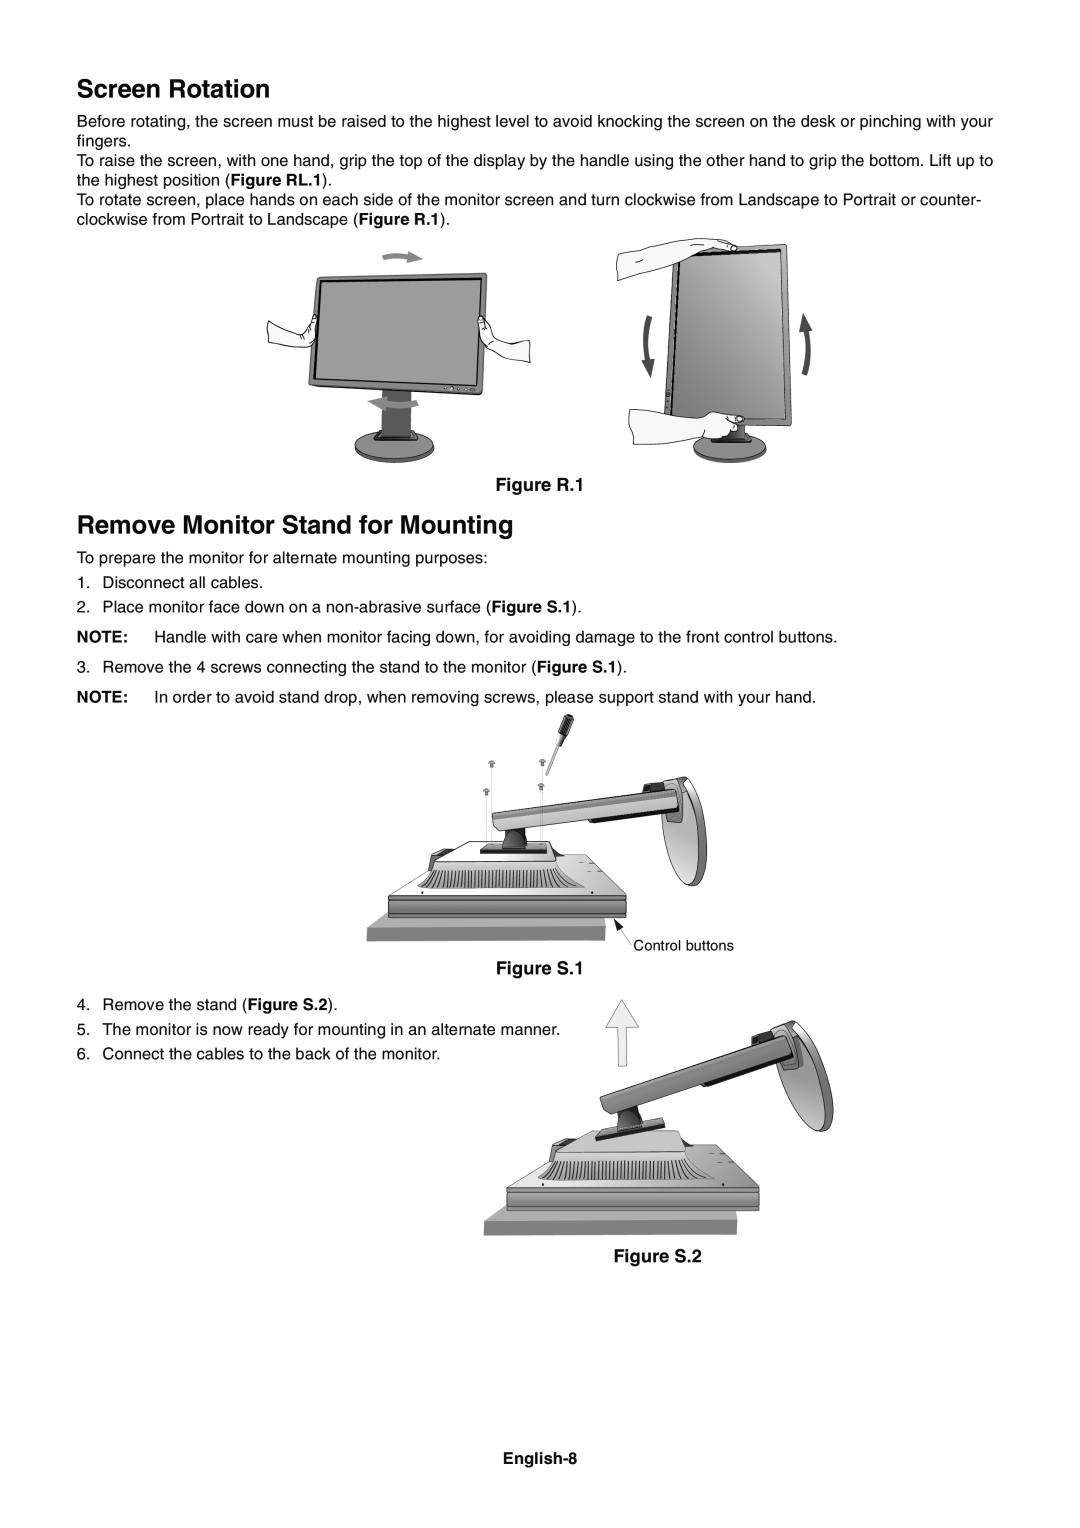 NEC E231W-BK user manual Screen Rotation, Remove Monitor Stand for Mounting, Figure R.1, Figure S.1, Figure S.2 